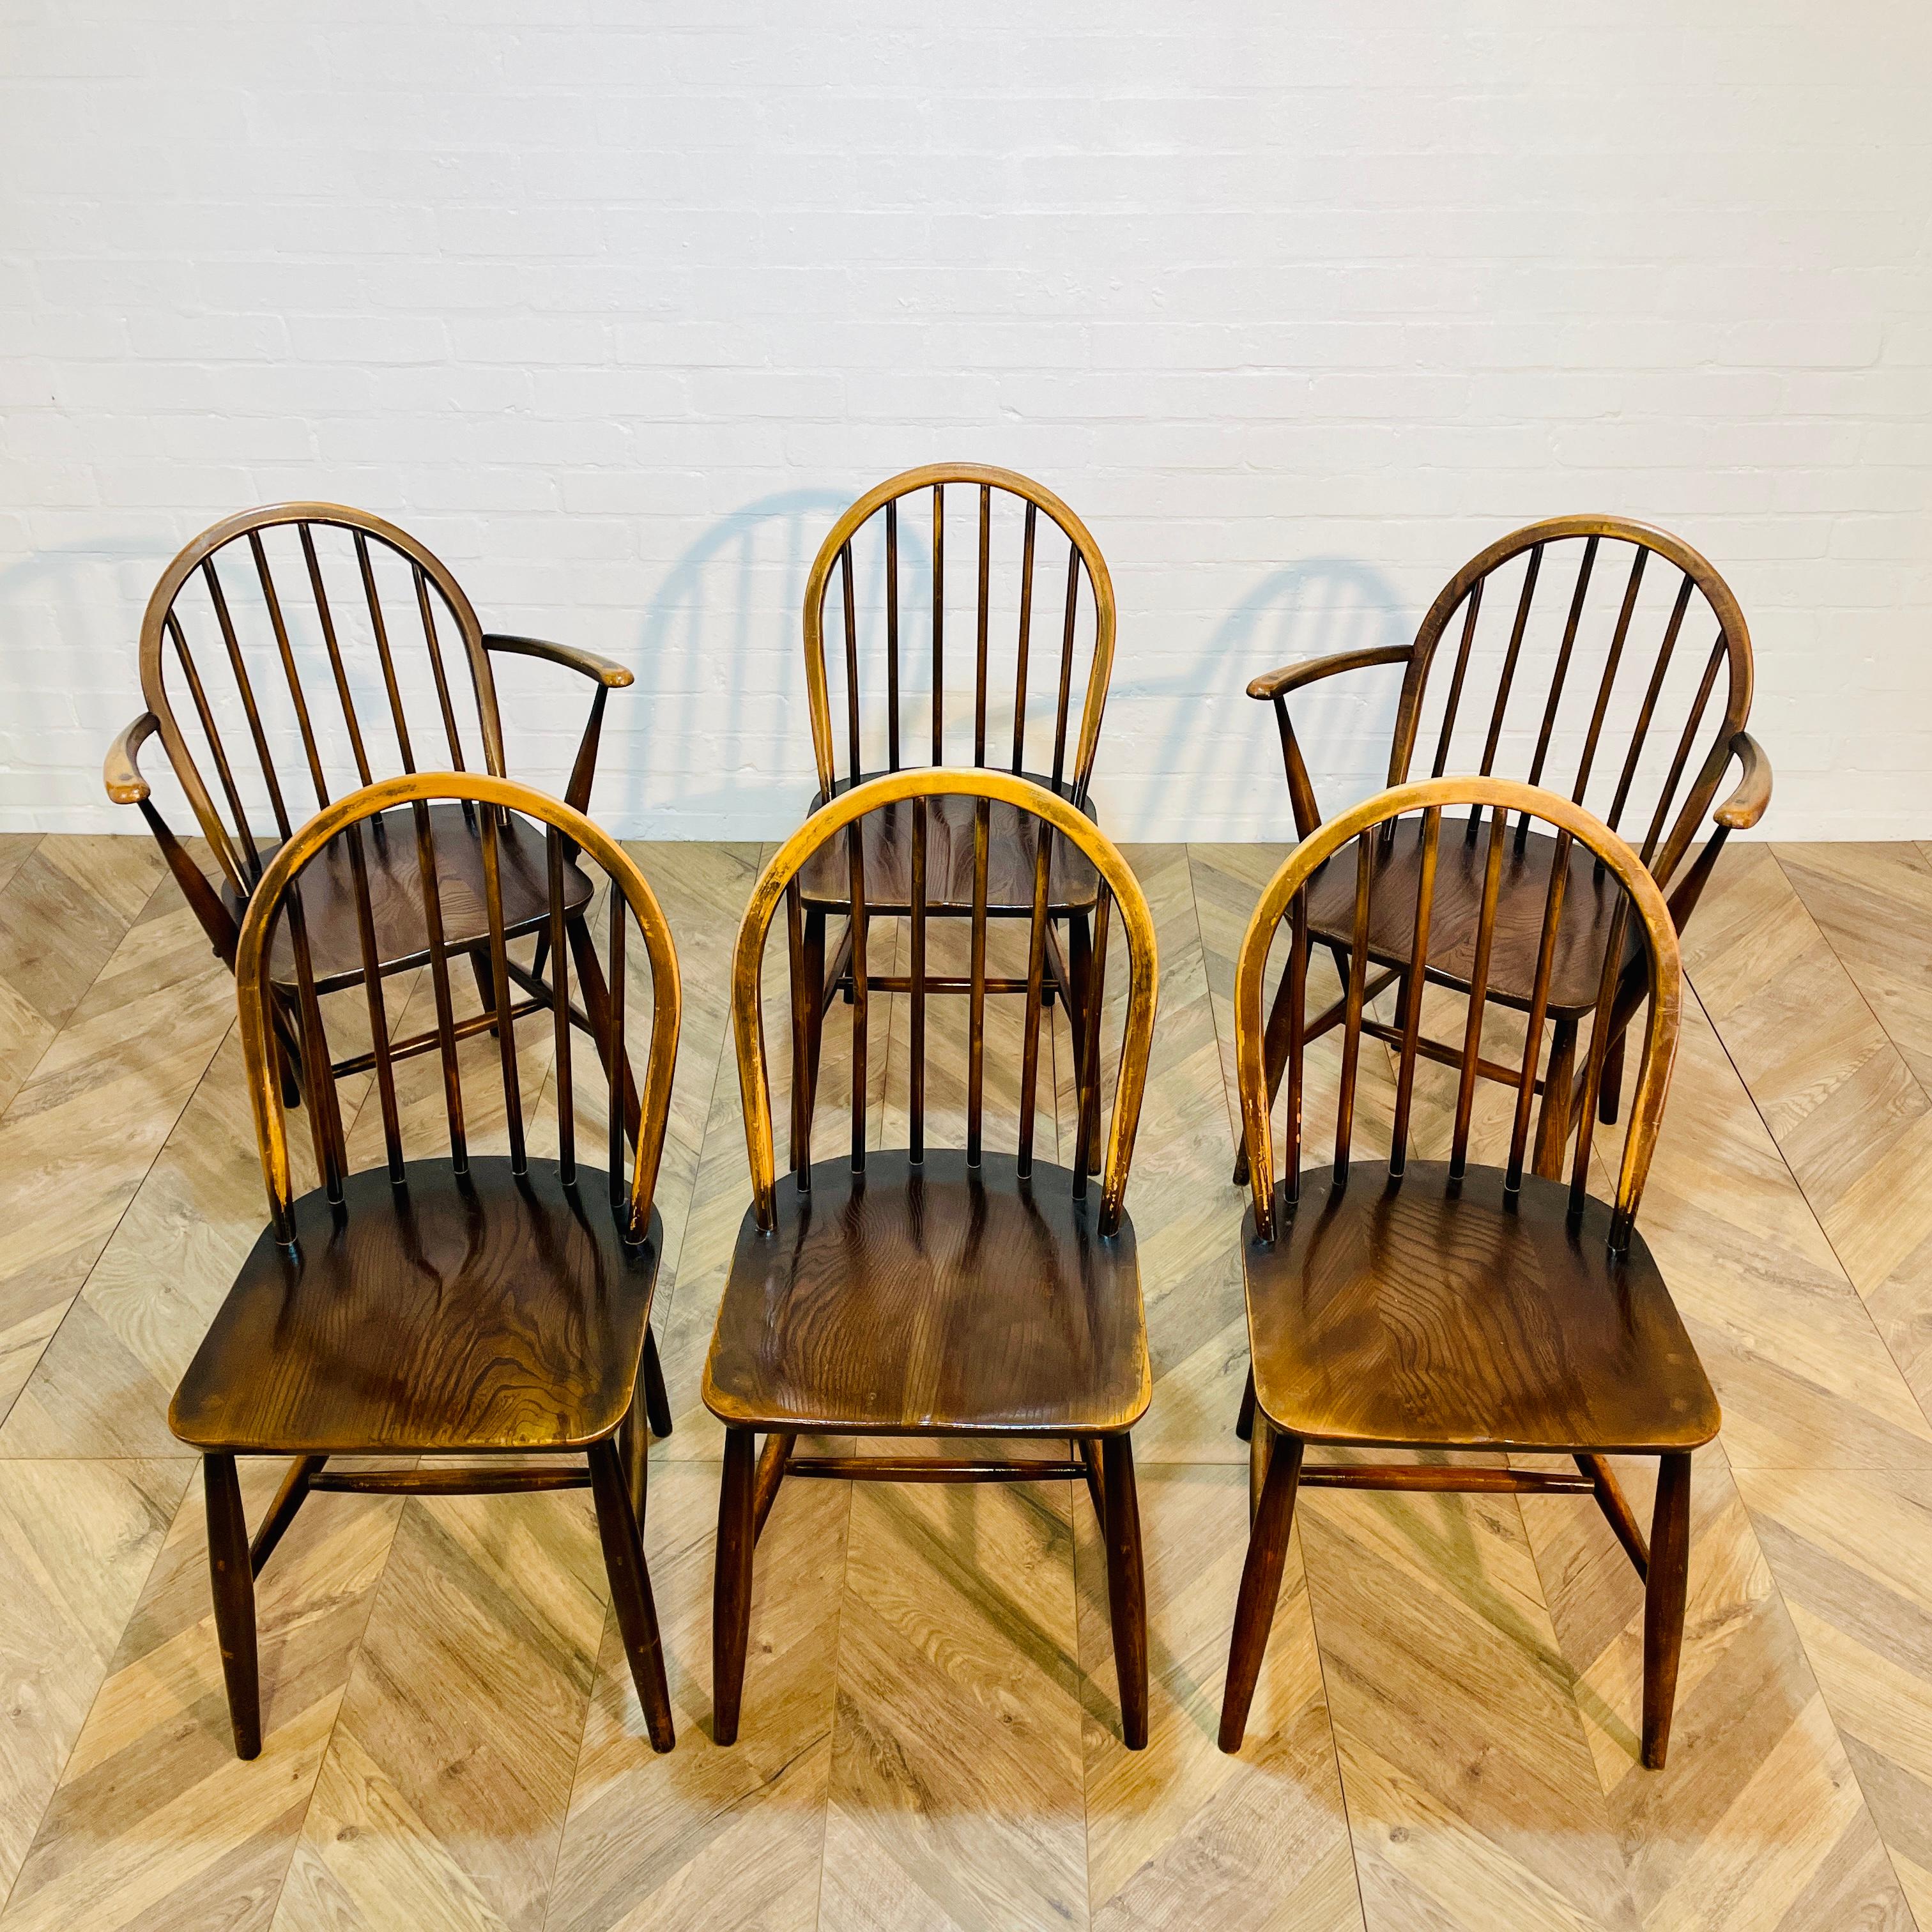 Set of 6, Ercol Windsor Hoop-Back Chairs, 1960s. 4x Standard Chairs, 2x Carver Armchairs.

Designed by Lucian Ercolani, the chairs seamlessly blend contemporary British design and traditional craftsmanship.

The chairs are made from solid beech with